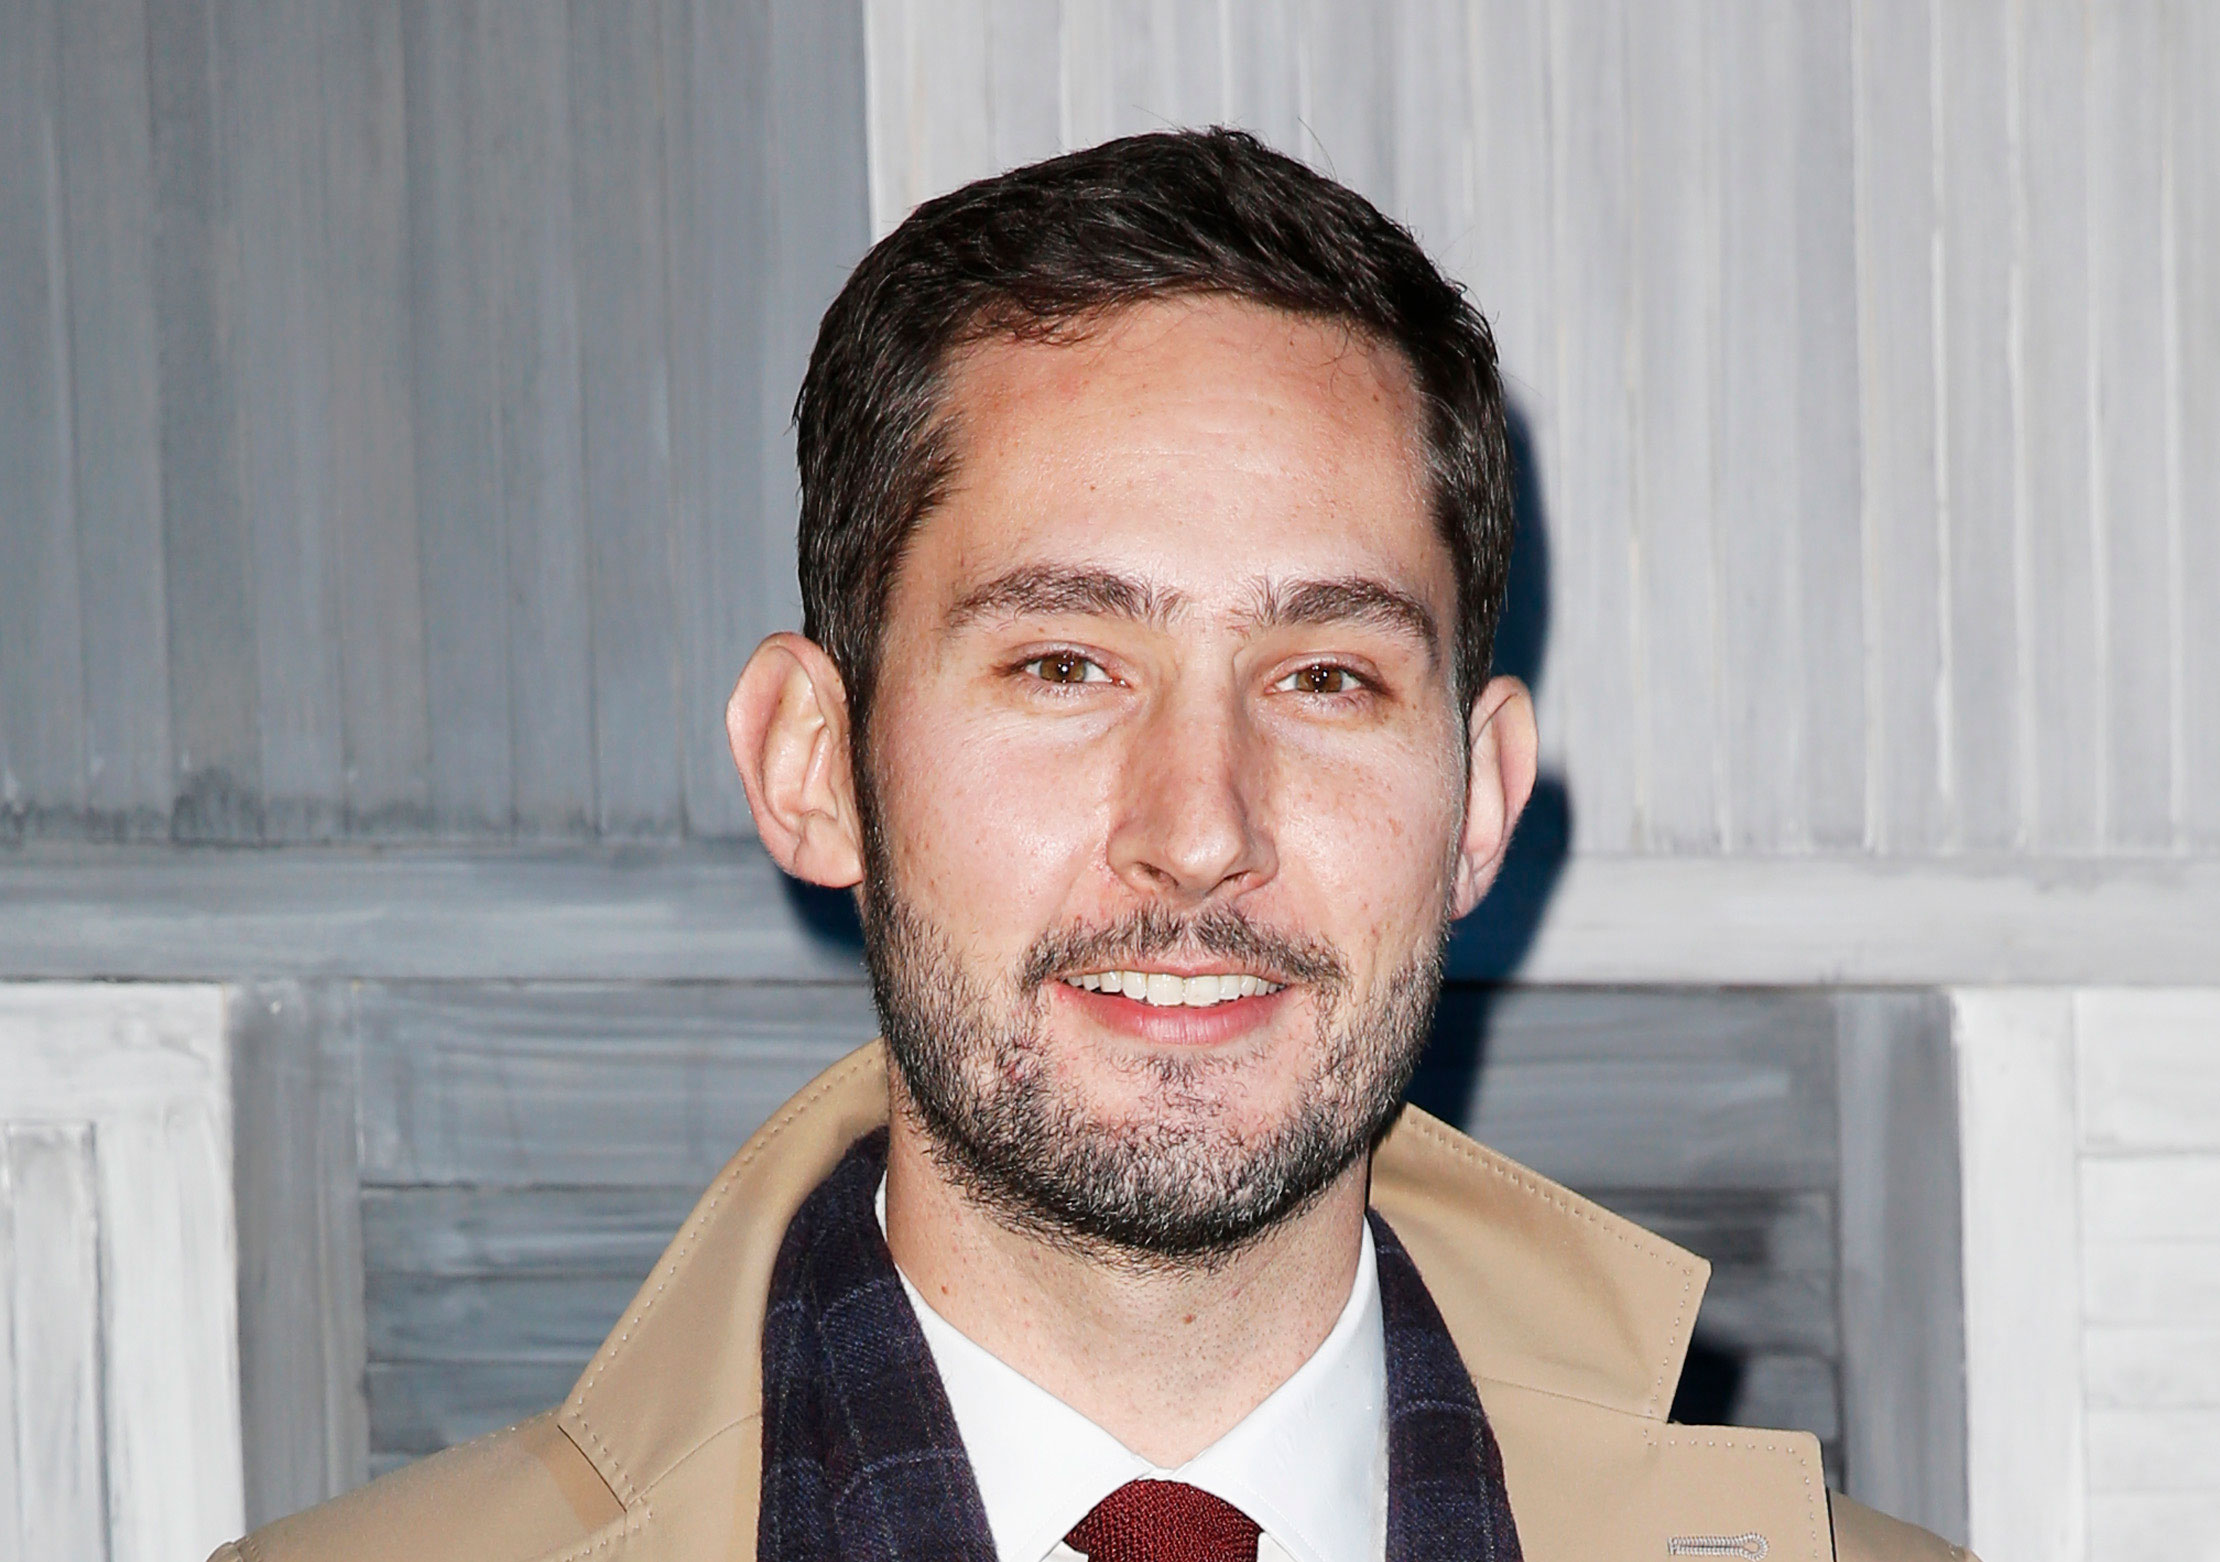 Instagram co-founder Kevin Systrom has backed the U.K. challenger bank Monzo